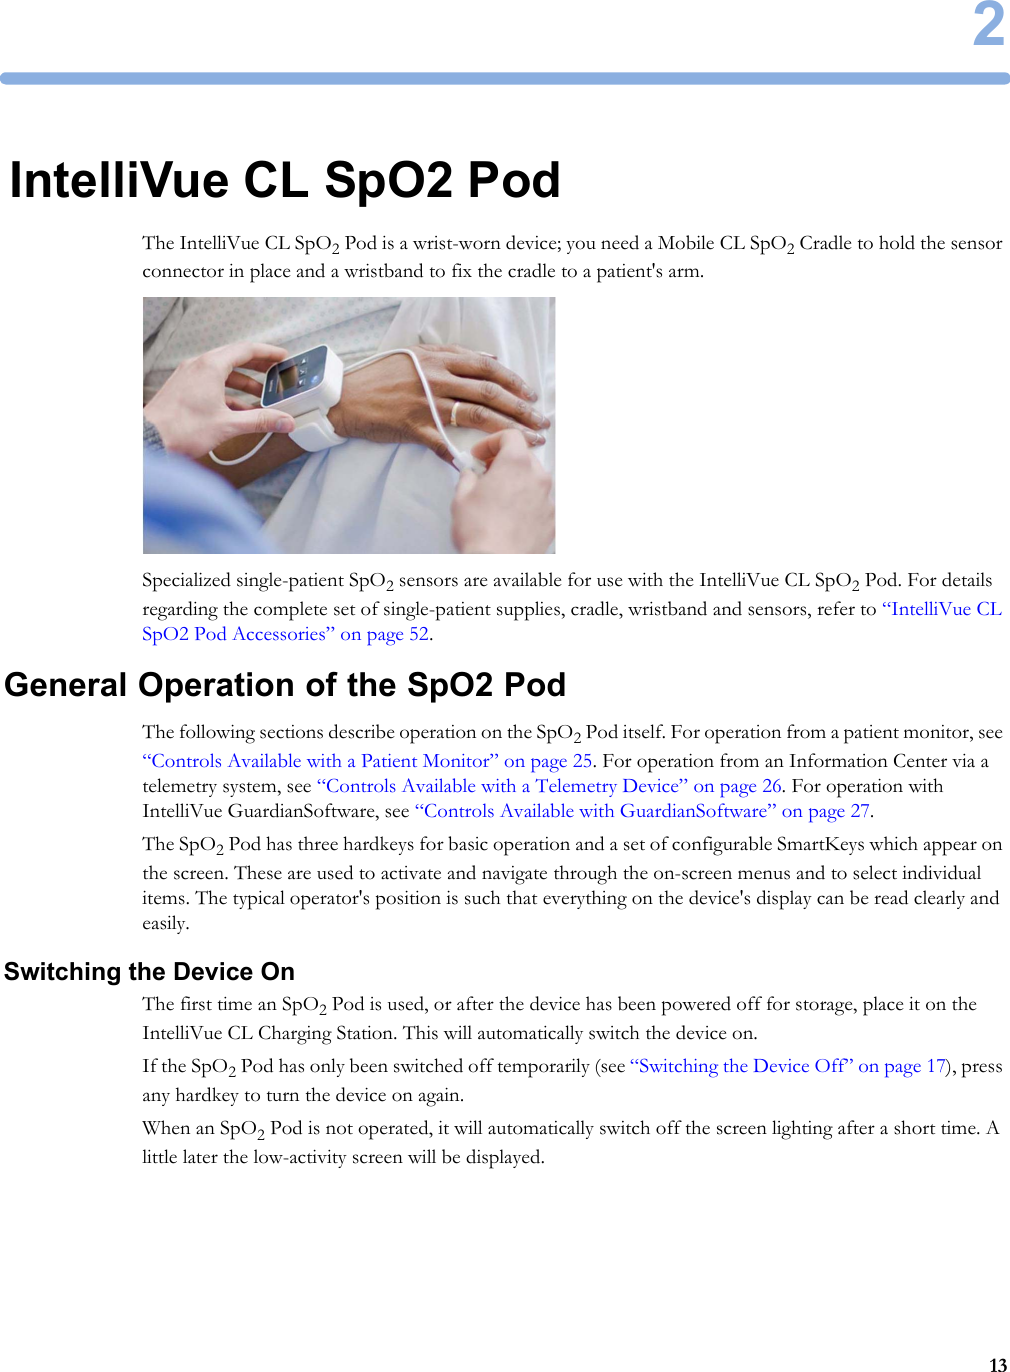 2132IntelliVue CL SpO2 PodThe IntelliVue CL SpO2 Pod is a wrist-worn device; you need a Mobile CL SpO2 Cradle to hold the sensor connector in place and a wristband to fix the cradle to a patient&apos;s arm.Specialized single-patient SpO2 sensors are available for use with the IntelliVue CL SpO2 Pod. For details regarding the complete set of single-patient supplies, cradle, wristband and sensors, refer to “IntelliVue CL SpO2 Pod Accessories” on page 52.General Operation of the SpO2 PodThe following sections describe operation on the SpO2 Pod itself. For operation from a patient monitor, see “Controls Available with a Patient Monitor” on page 25. For operation from an Information Center via a telemetry system, see “Controls Available with a Telemetry Device” on page 26. For operation with IntelliVue GuardianSoftware, see “Controls Available with GuardianSoftware” on page 27.The SpO2 Pod has three hardkeys for basic operation and a set of configurable SmartKeys which appear on the screen. These are used to activate and navigate through the on-screen menus and to select individual items. The typical operator&apos;s position is such that everything on the device&apos;s display can be read clearly and easily.Switching the Device OnThe first time an SpO2 Pod is used, or after the device has been powered off for storage, place it on the IntelliVue CL Charging Station. This will automatically switch the device on.If the SpO2 Pod has only been switched off temporarily (see “Switching the Device Off” on page 17), press any hardkey to turn the device on again.When an SpO2 Pod is not operated, it will automatically switch off the screen lighting after a short time. A little later the low-activity screen will be displayed.